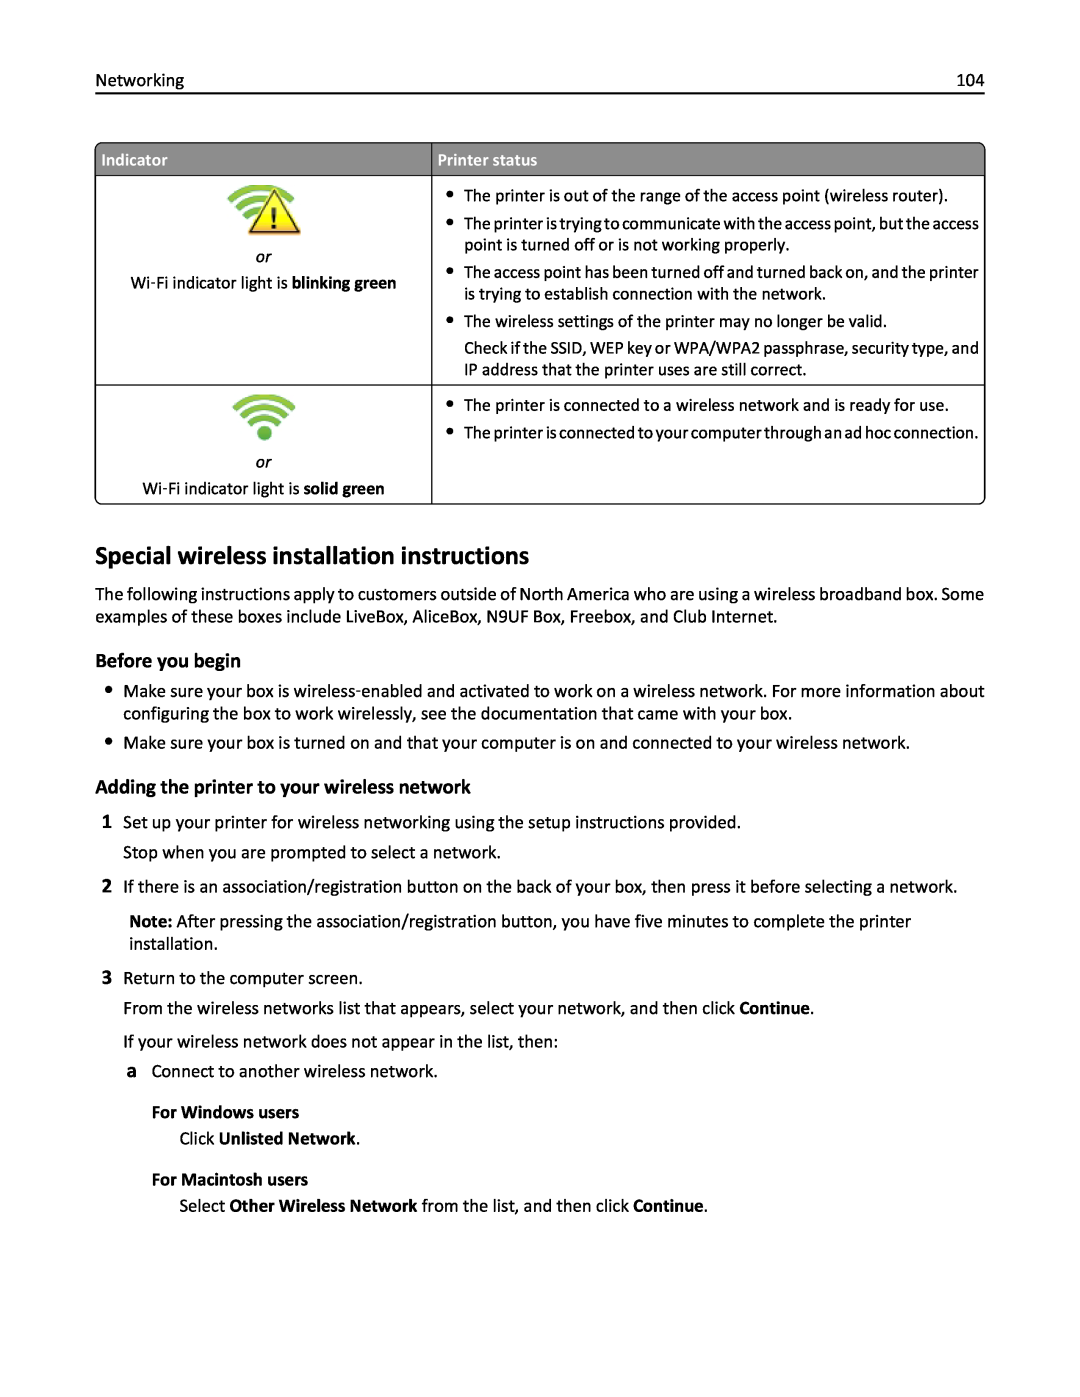 Lexmark 20E, 200 Special wireless installation instructions, Before you begin, Adding the printer to your wireless network 